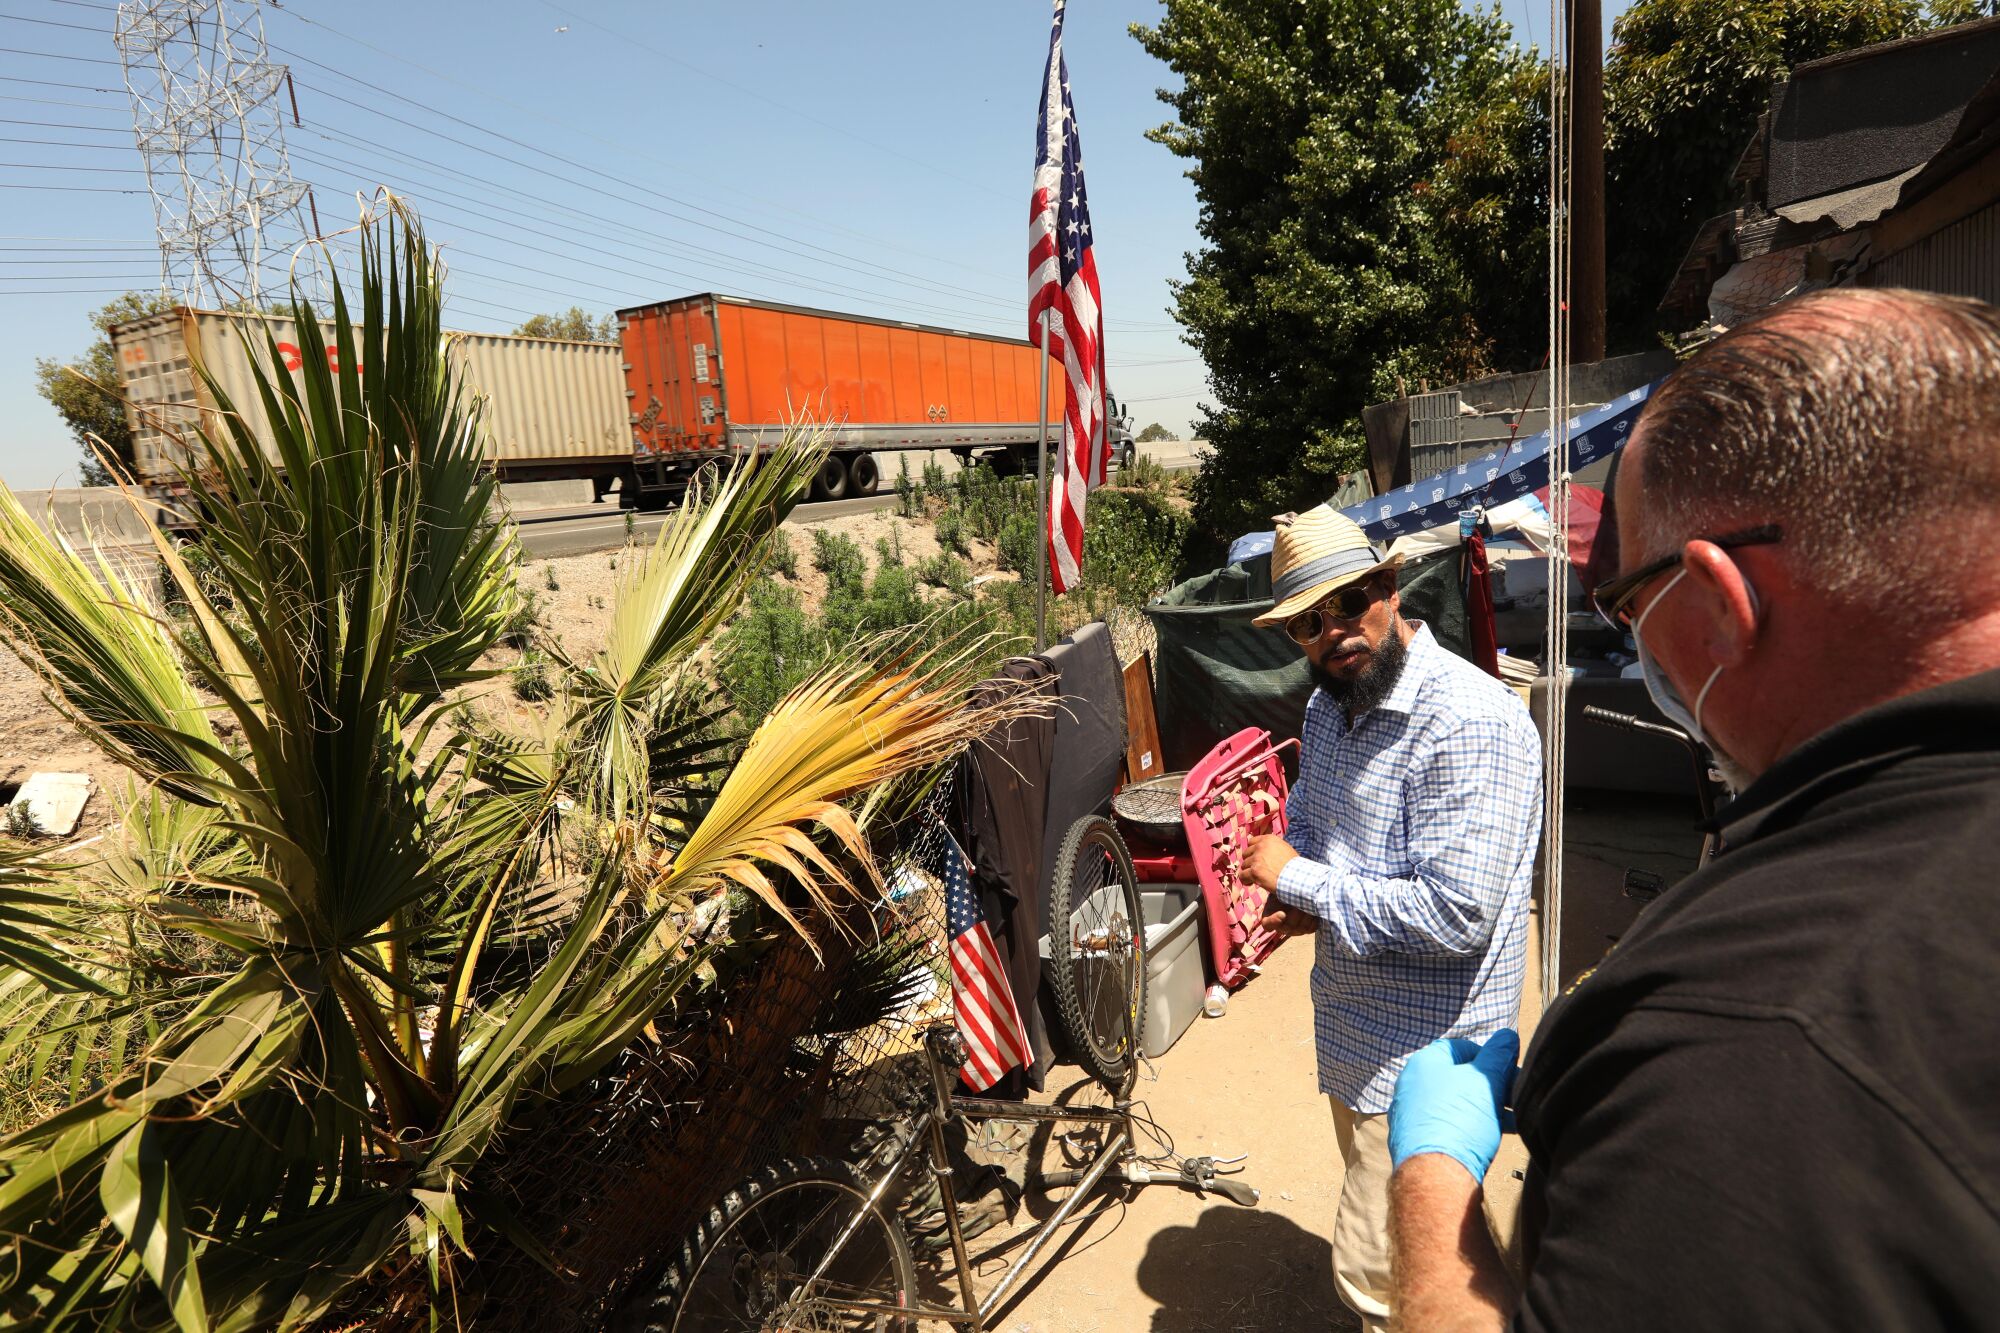 Outreach worker John Oliver, right, talks with Carlos Aguirre, who lives in an encampment along the 710 Freeway.